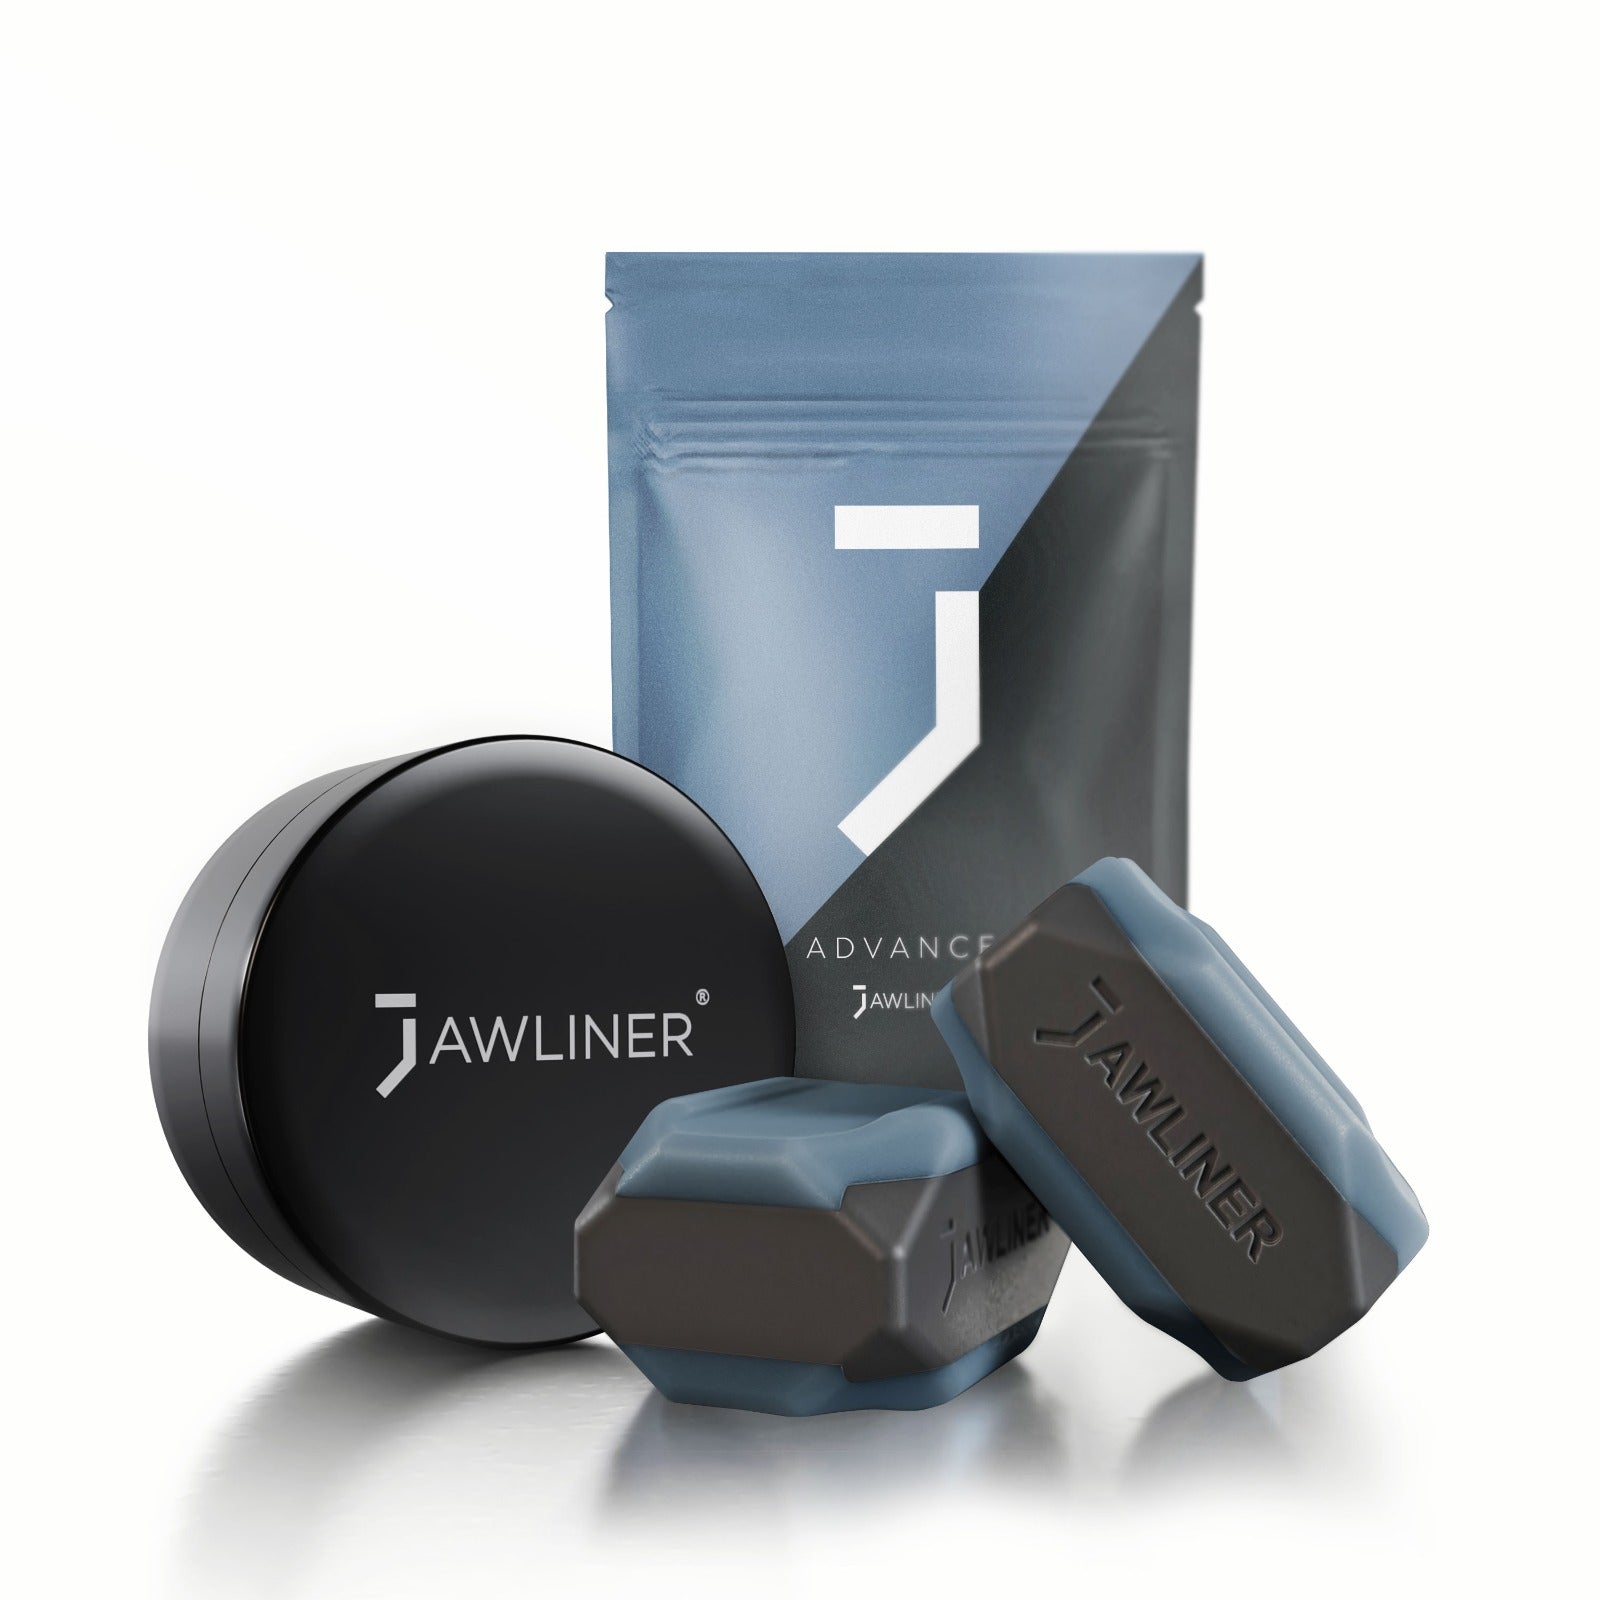 the picture shows the jawliner 3.0 advanced with the jawliner bag and the jawliner tin